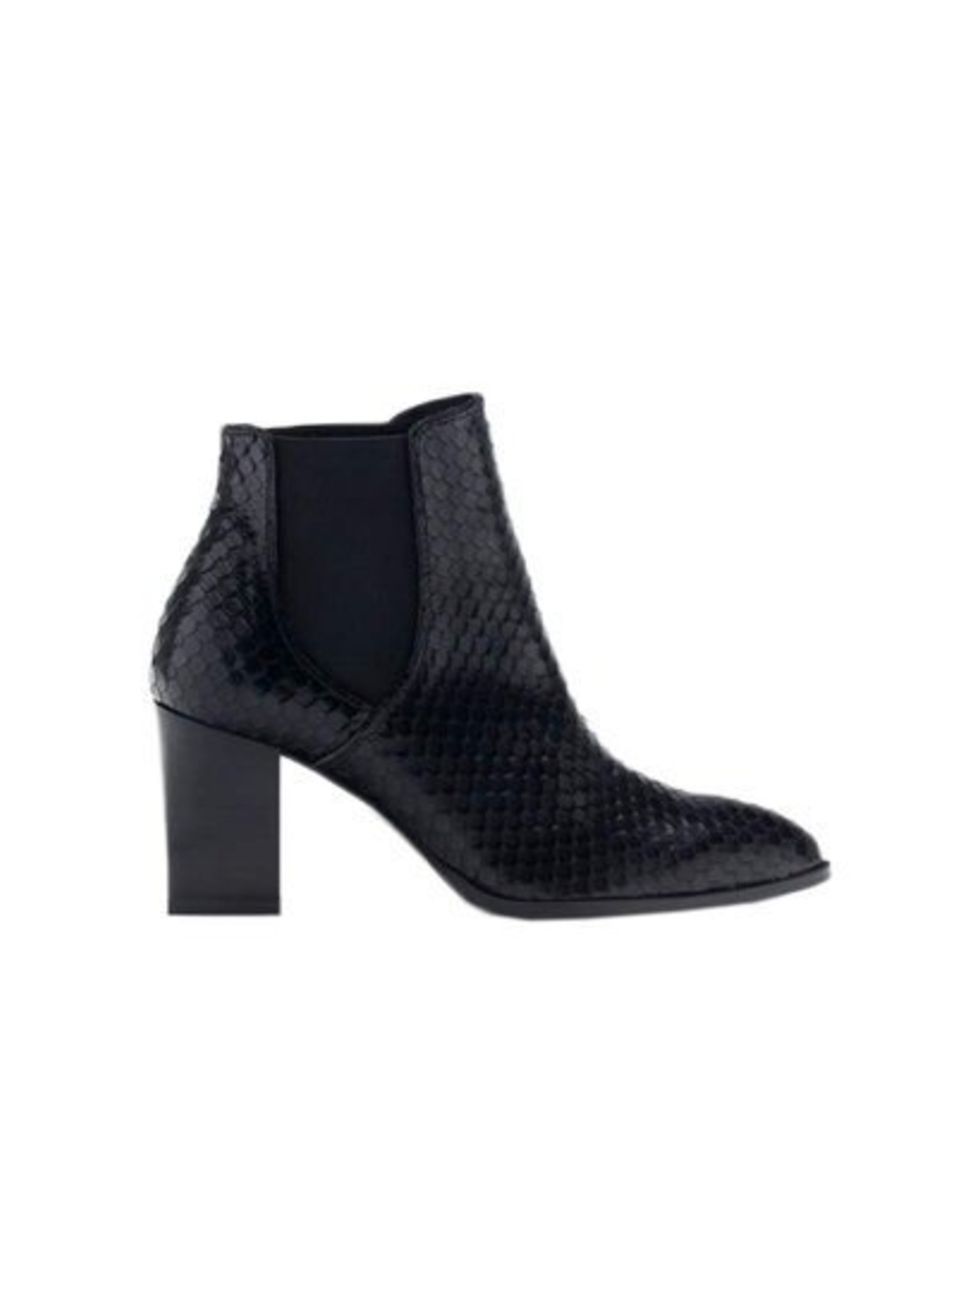 Great with next season's mid length skirt and bare legs come autumn.

Uterqüe boots, £125